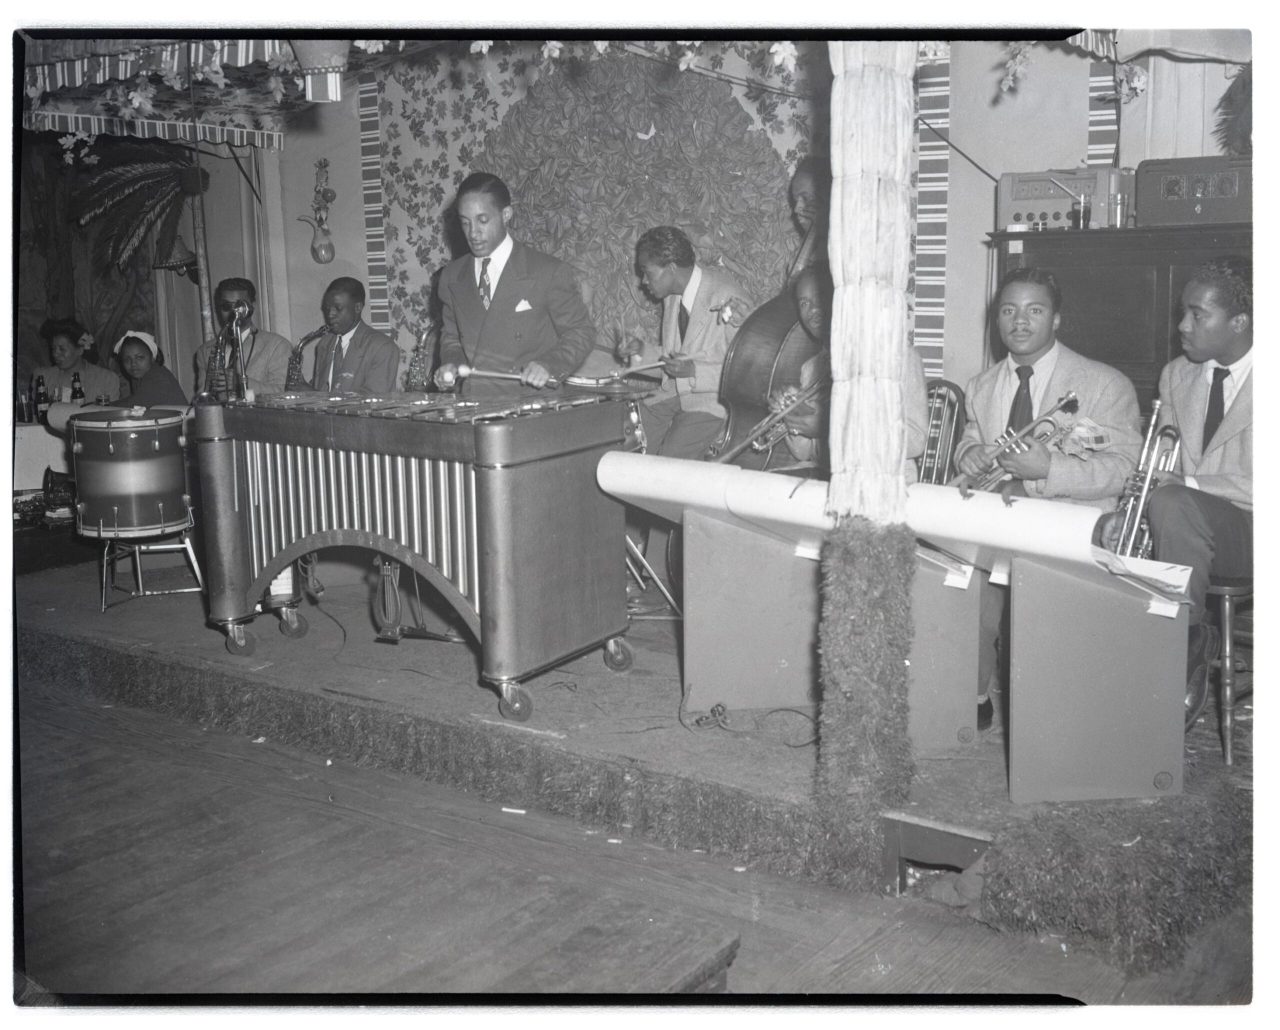 An archival black and white photo of an all-Black band on stage with the musicians playing different instruments.